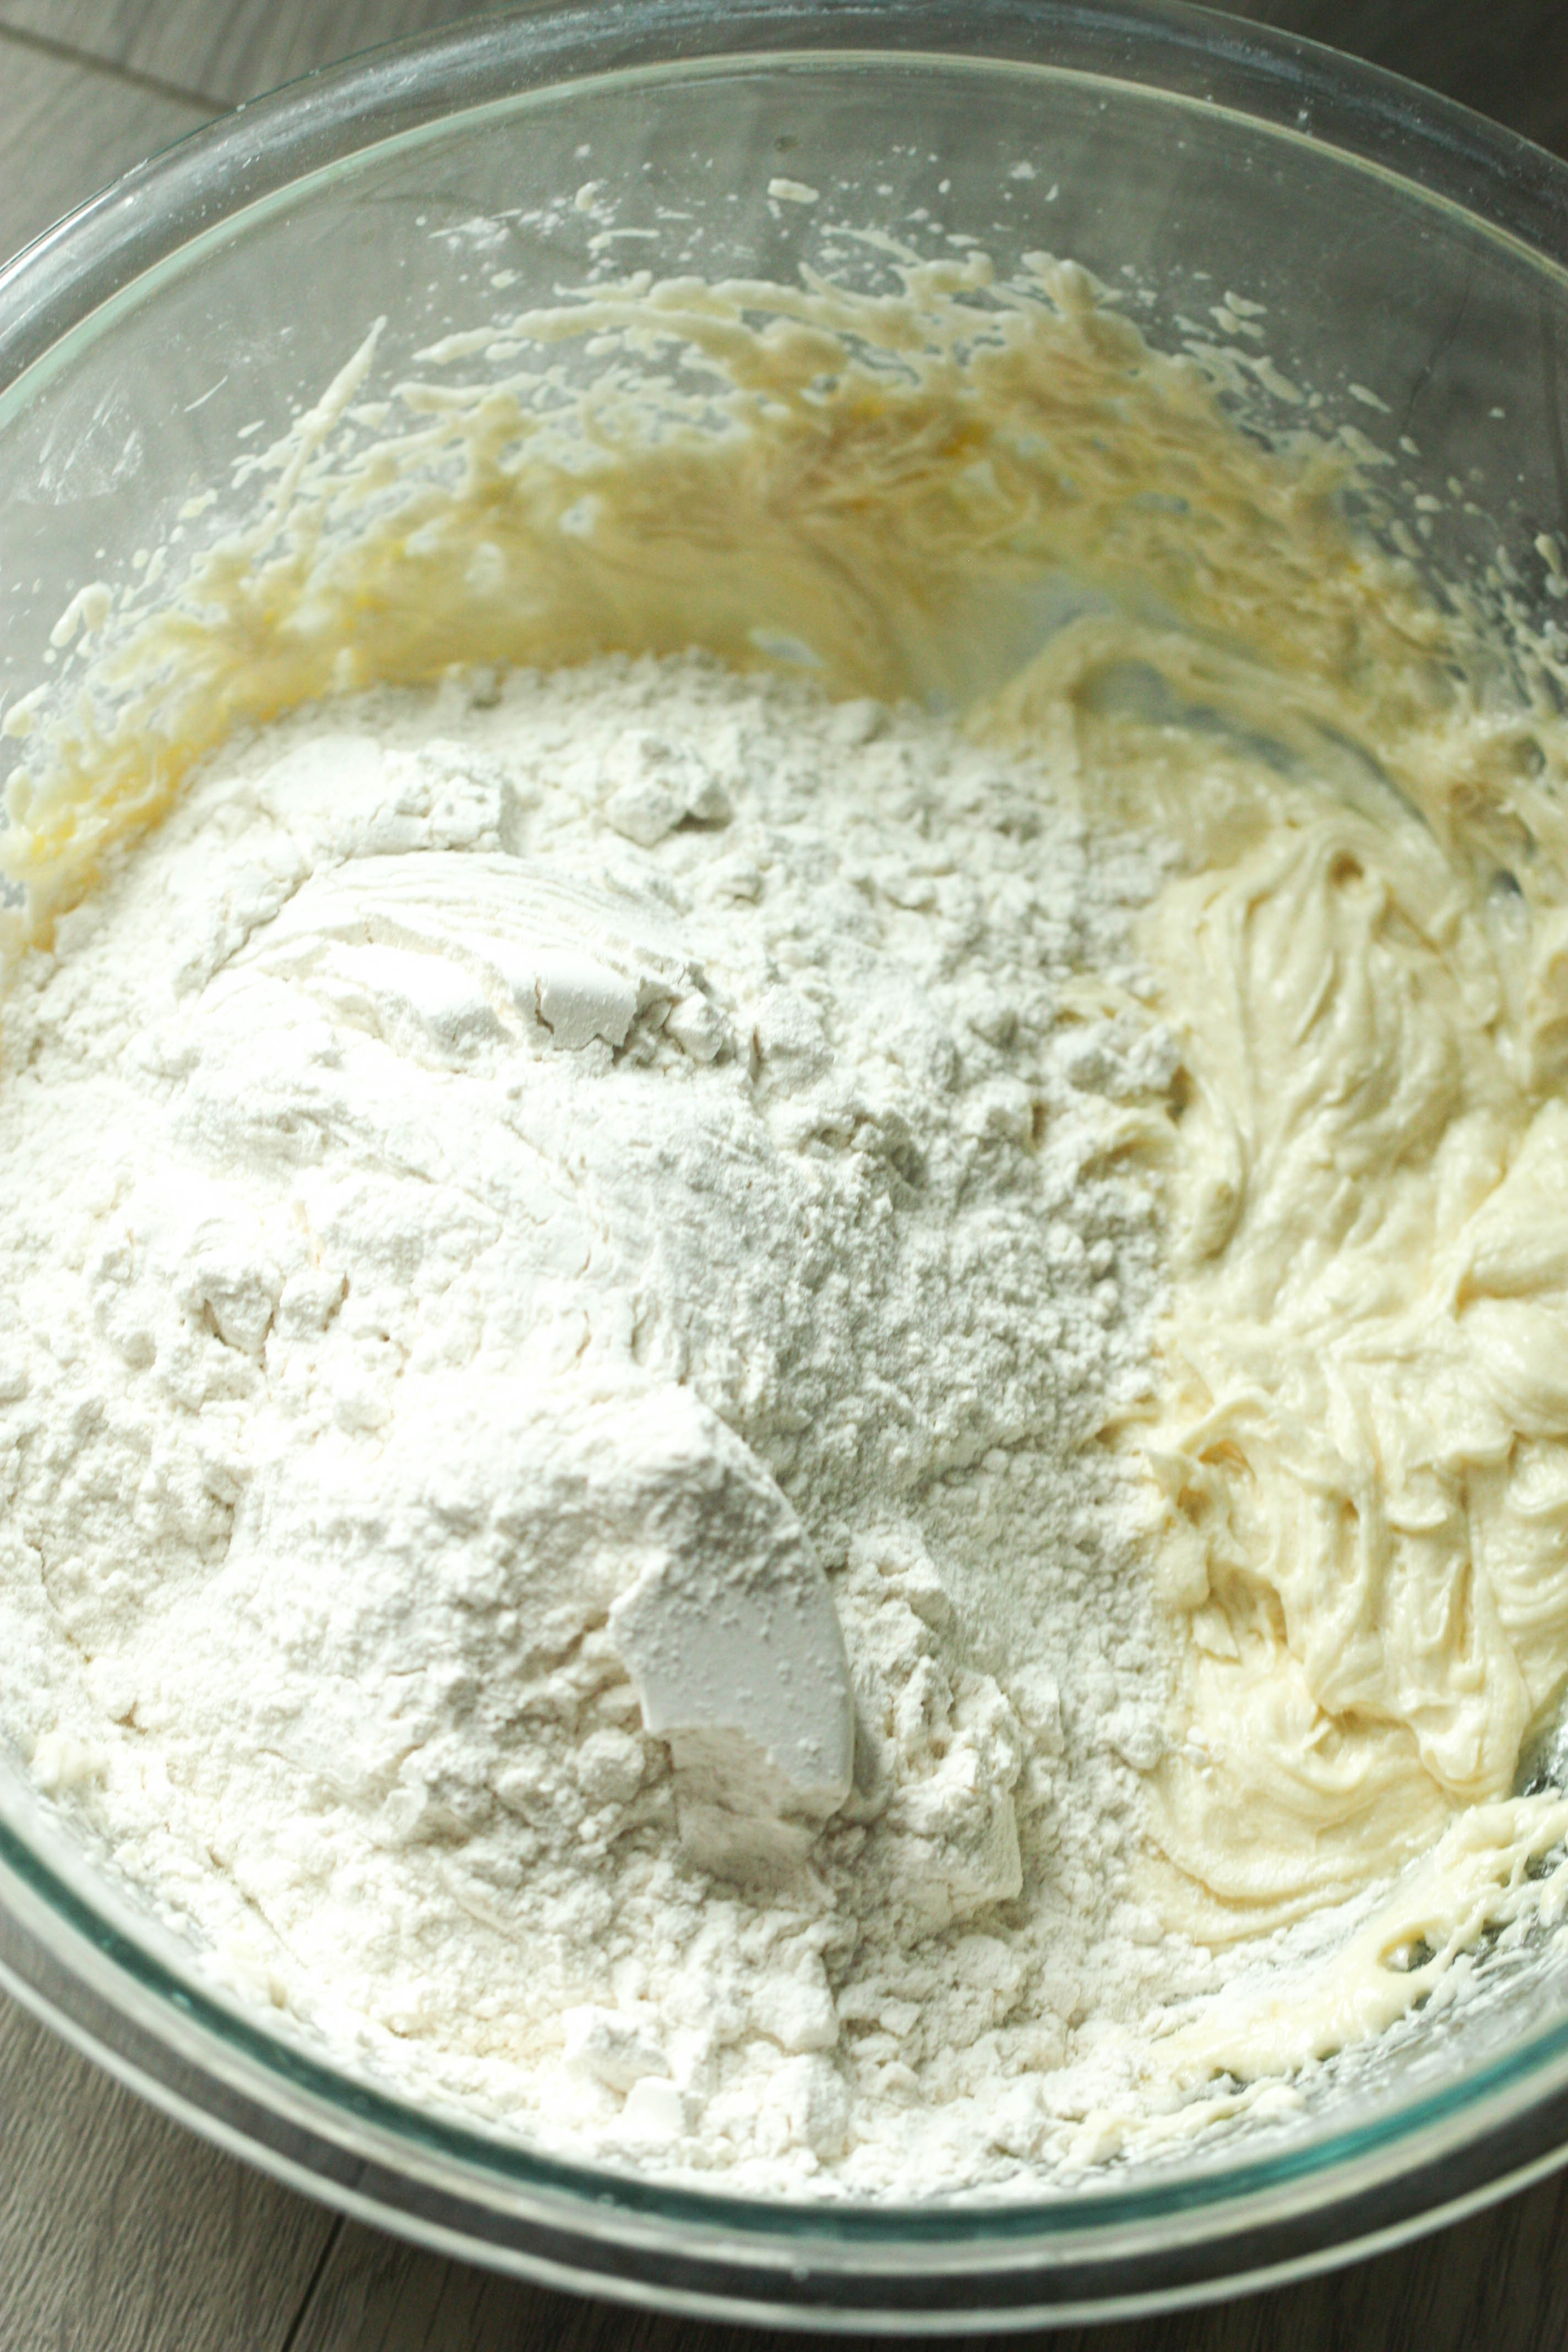 Flour added to the butter sugar mixture in the mixing bowl